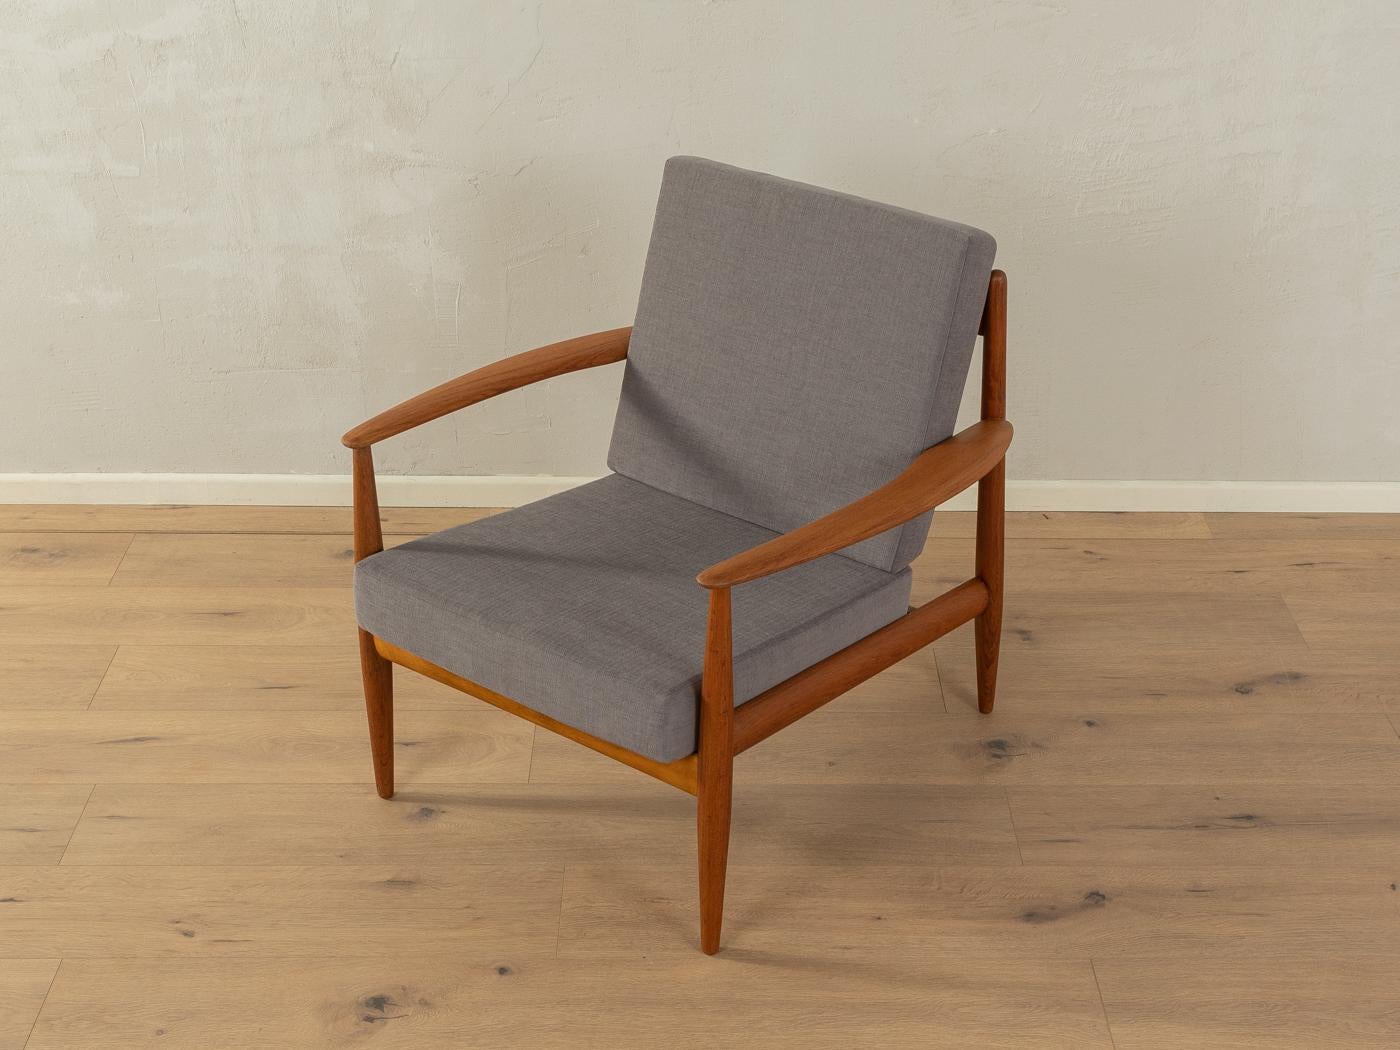 Rare armchair by Grete Jalk, model 118 for France & Daverkosen. The armchair comes from the first series from 1955. High quality solid teak wood frame. The seat and backrest have been newly upholstered and covered with a high-quality gray upholstery